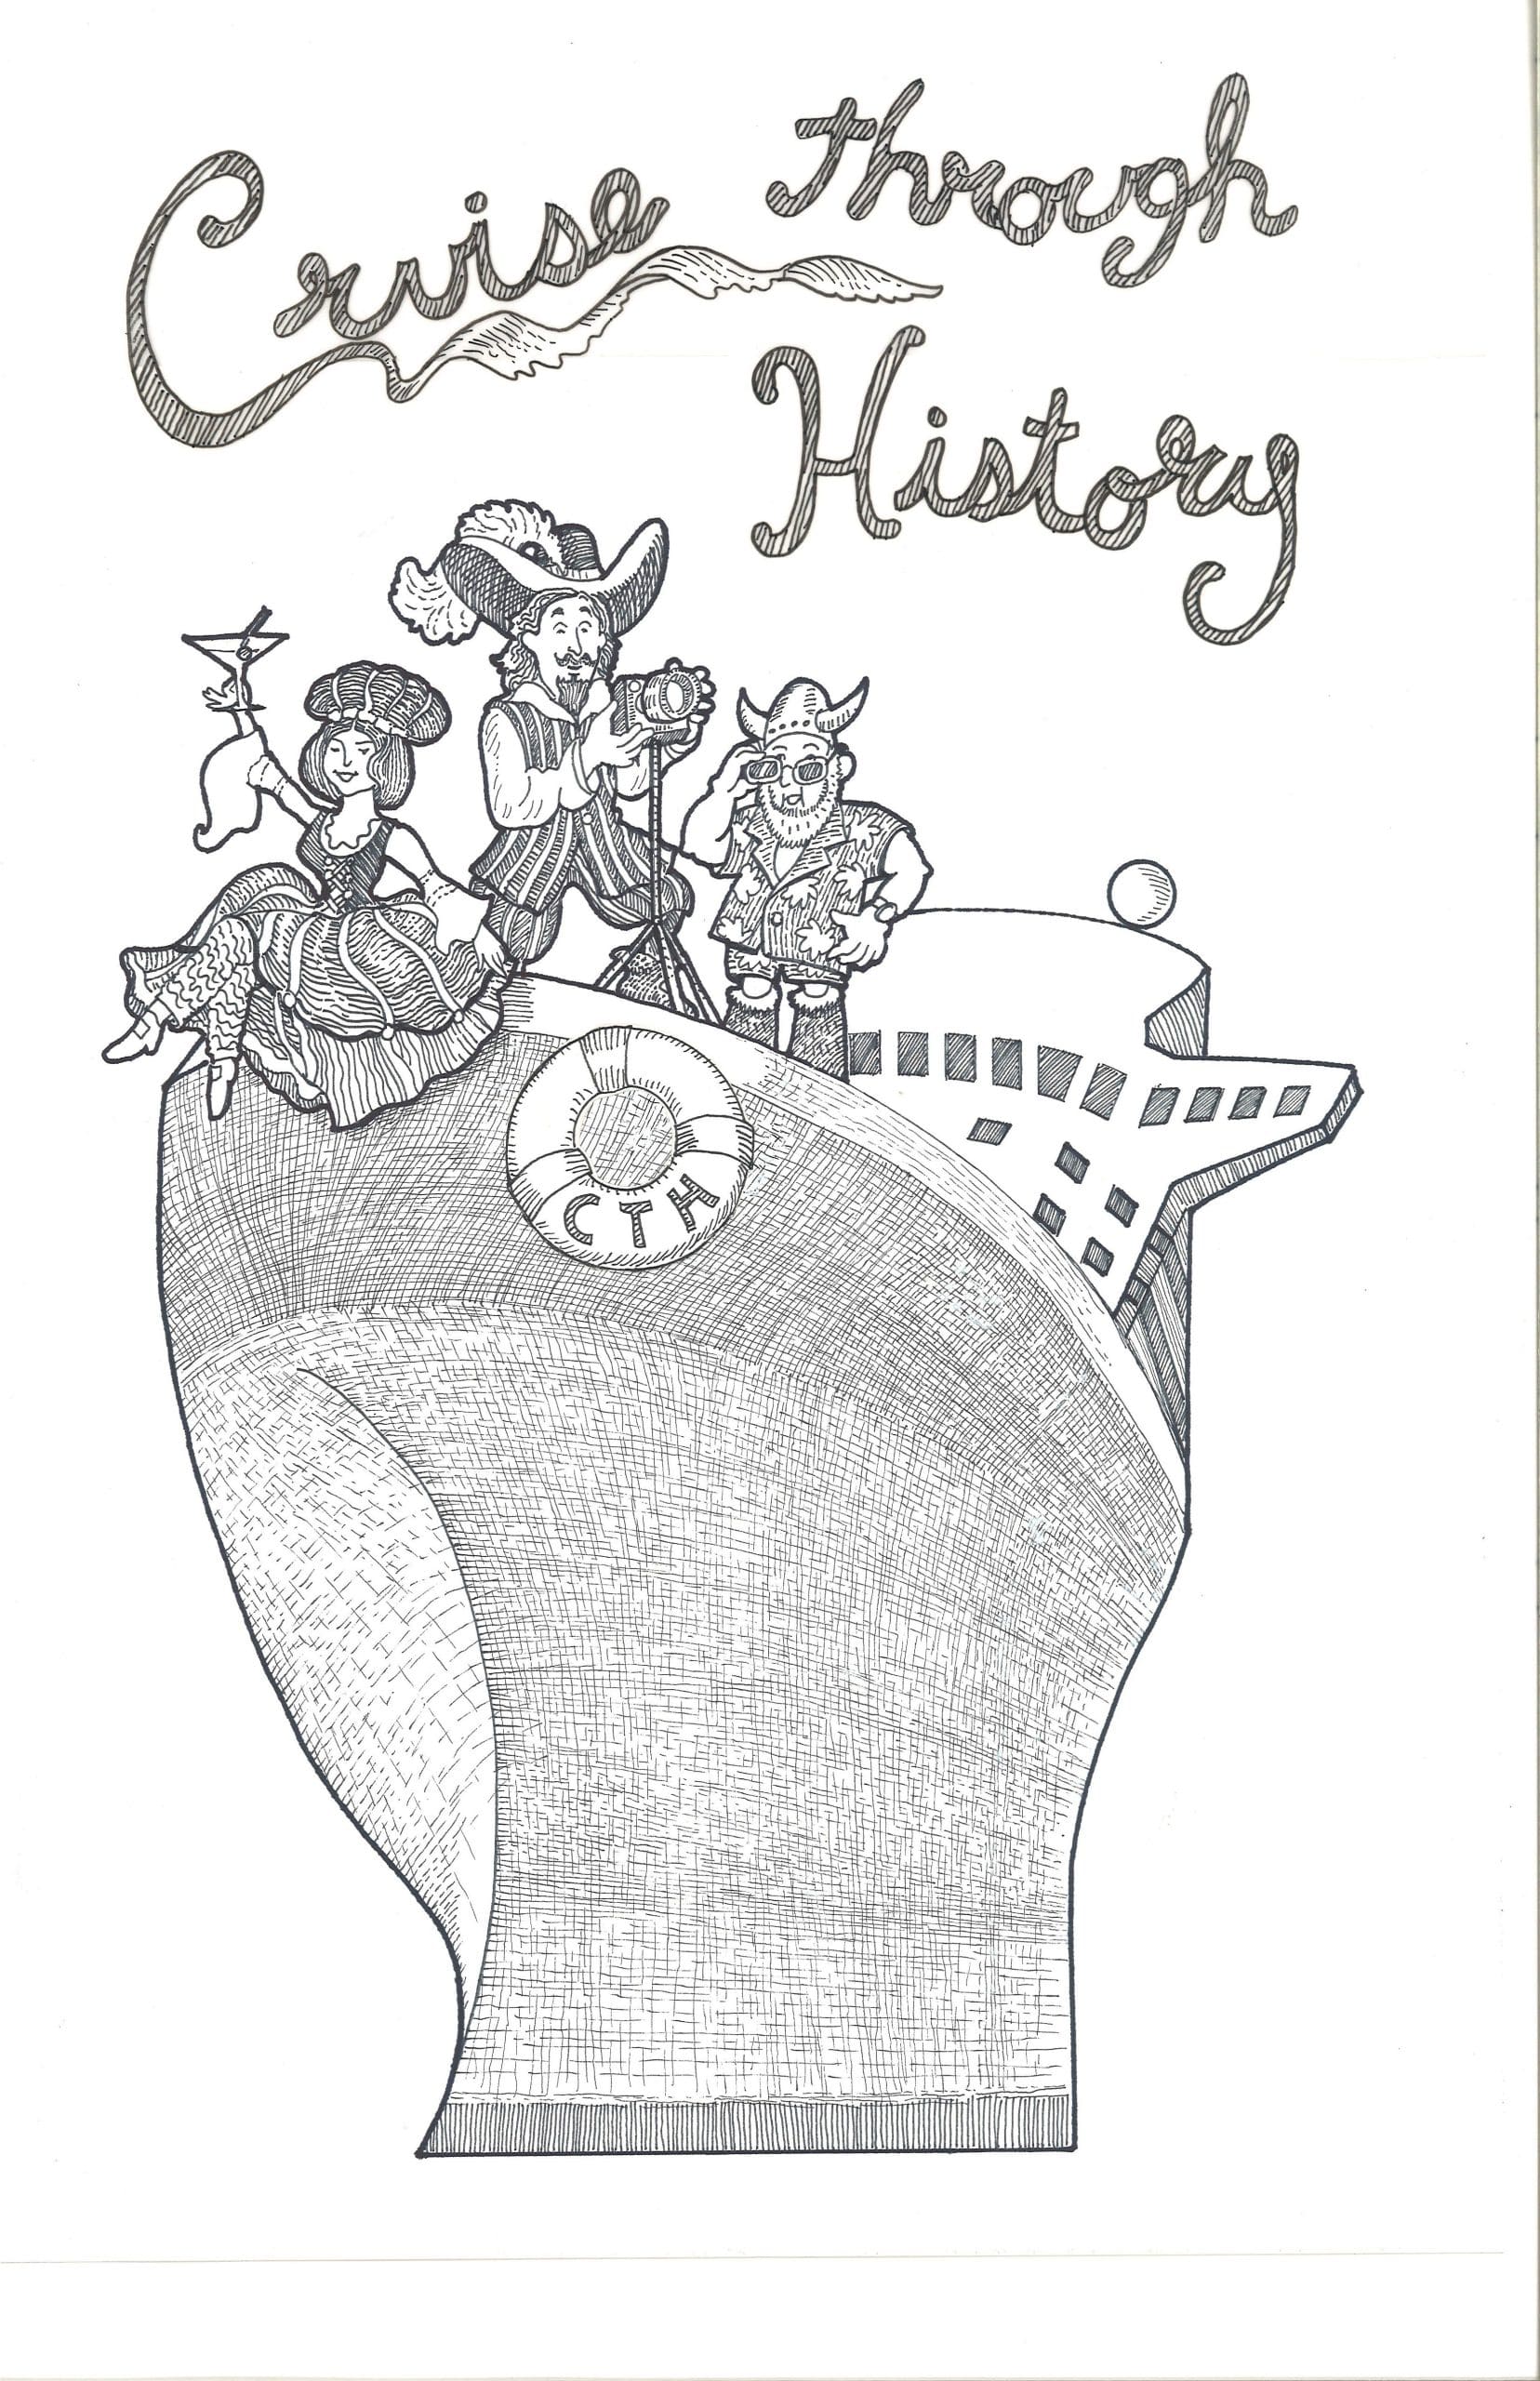 Line drawing of Cruise Through History Logo created by Dana Verkouteren